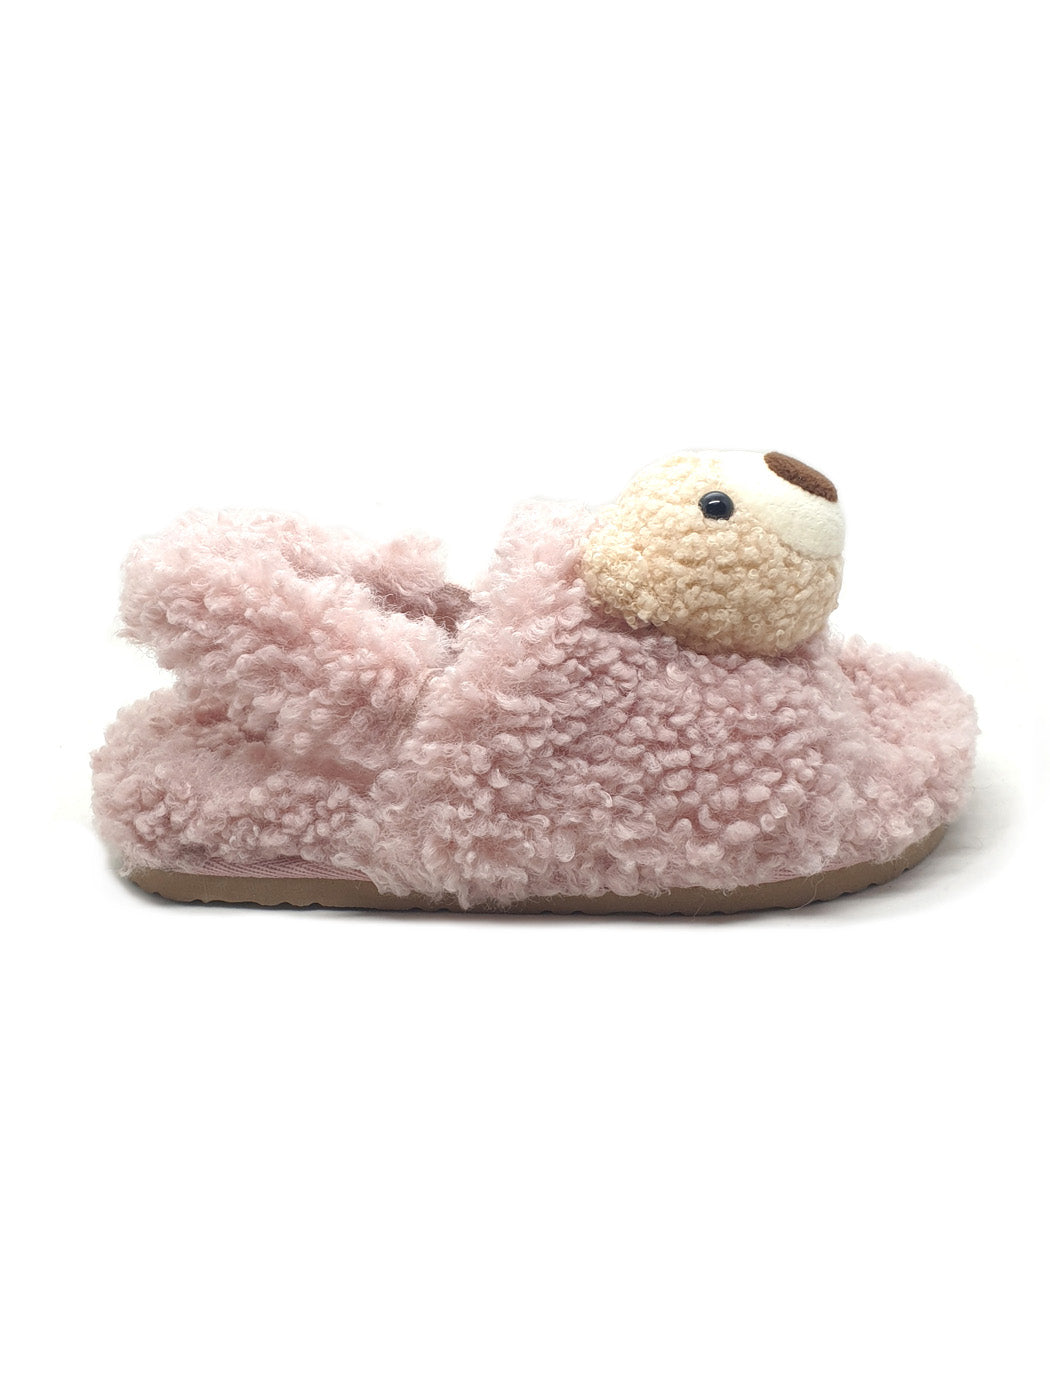 BABY Slipper with teddy peluche - COC-FURRY pink